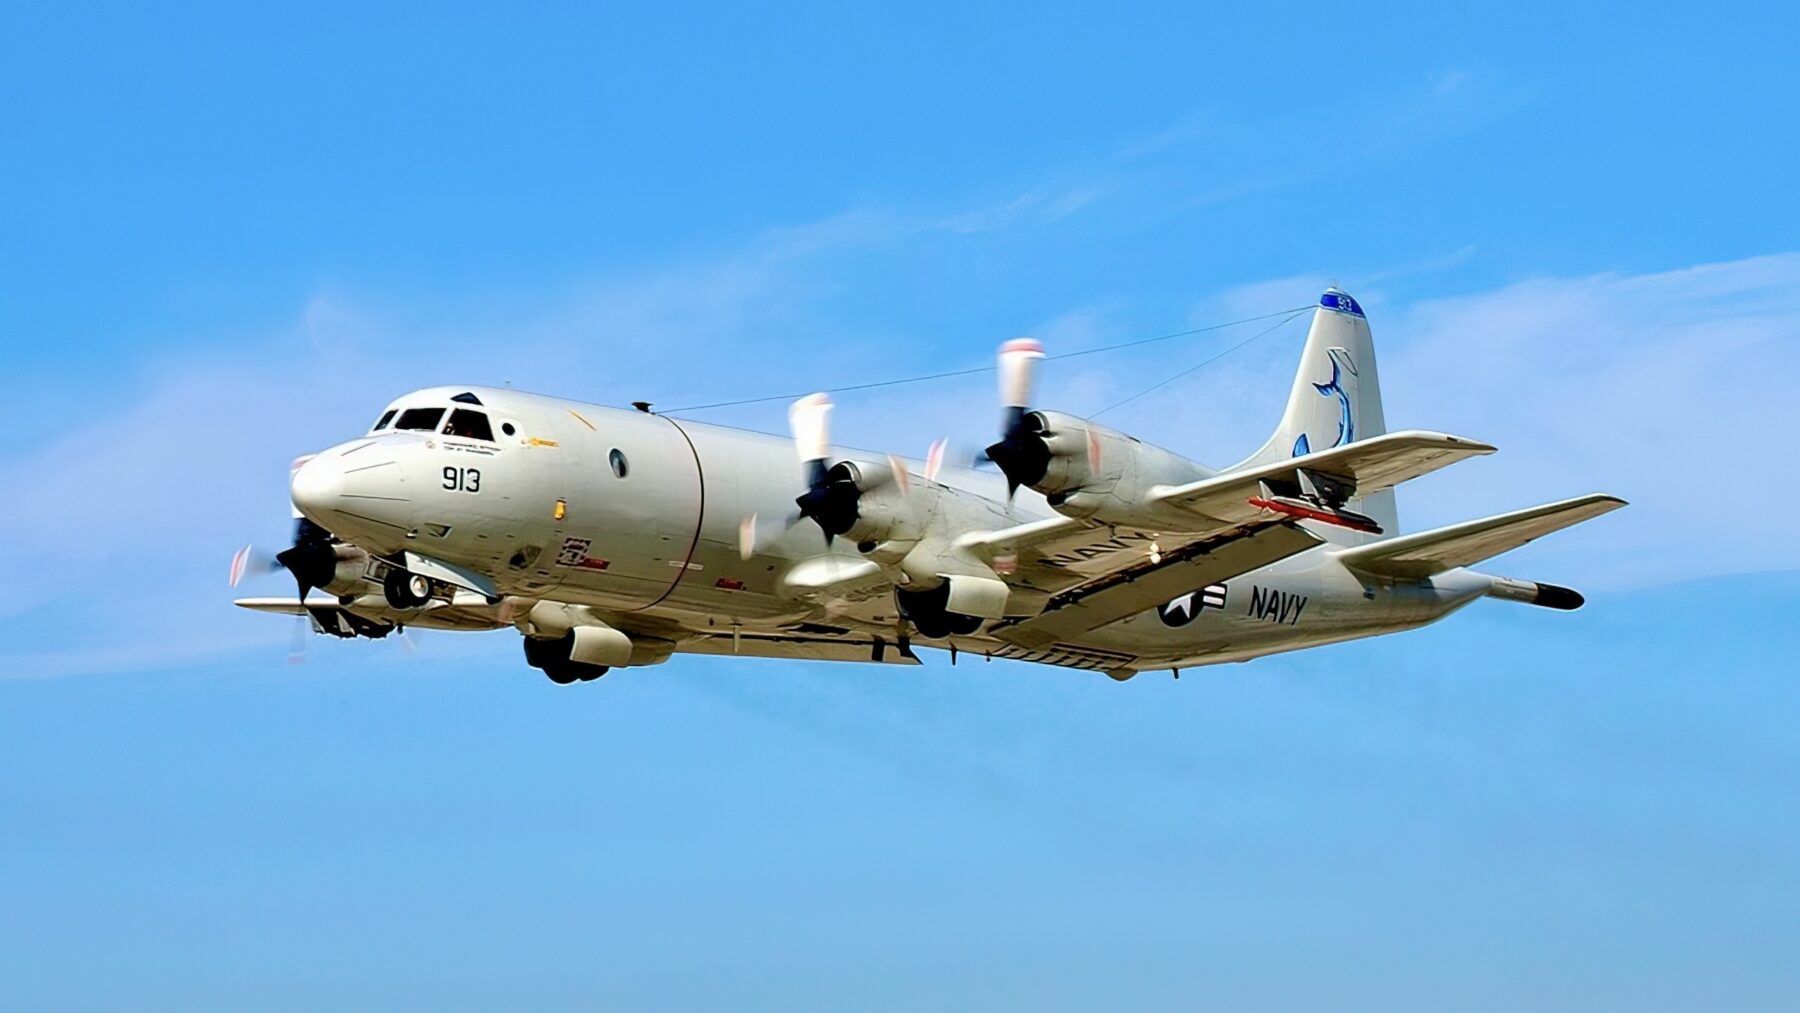 A P-3C "Orion" assigned to the "Fighting Marlins" of Patrol Squadron 40 (VP-40) takes off on a routine training mission